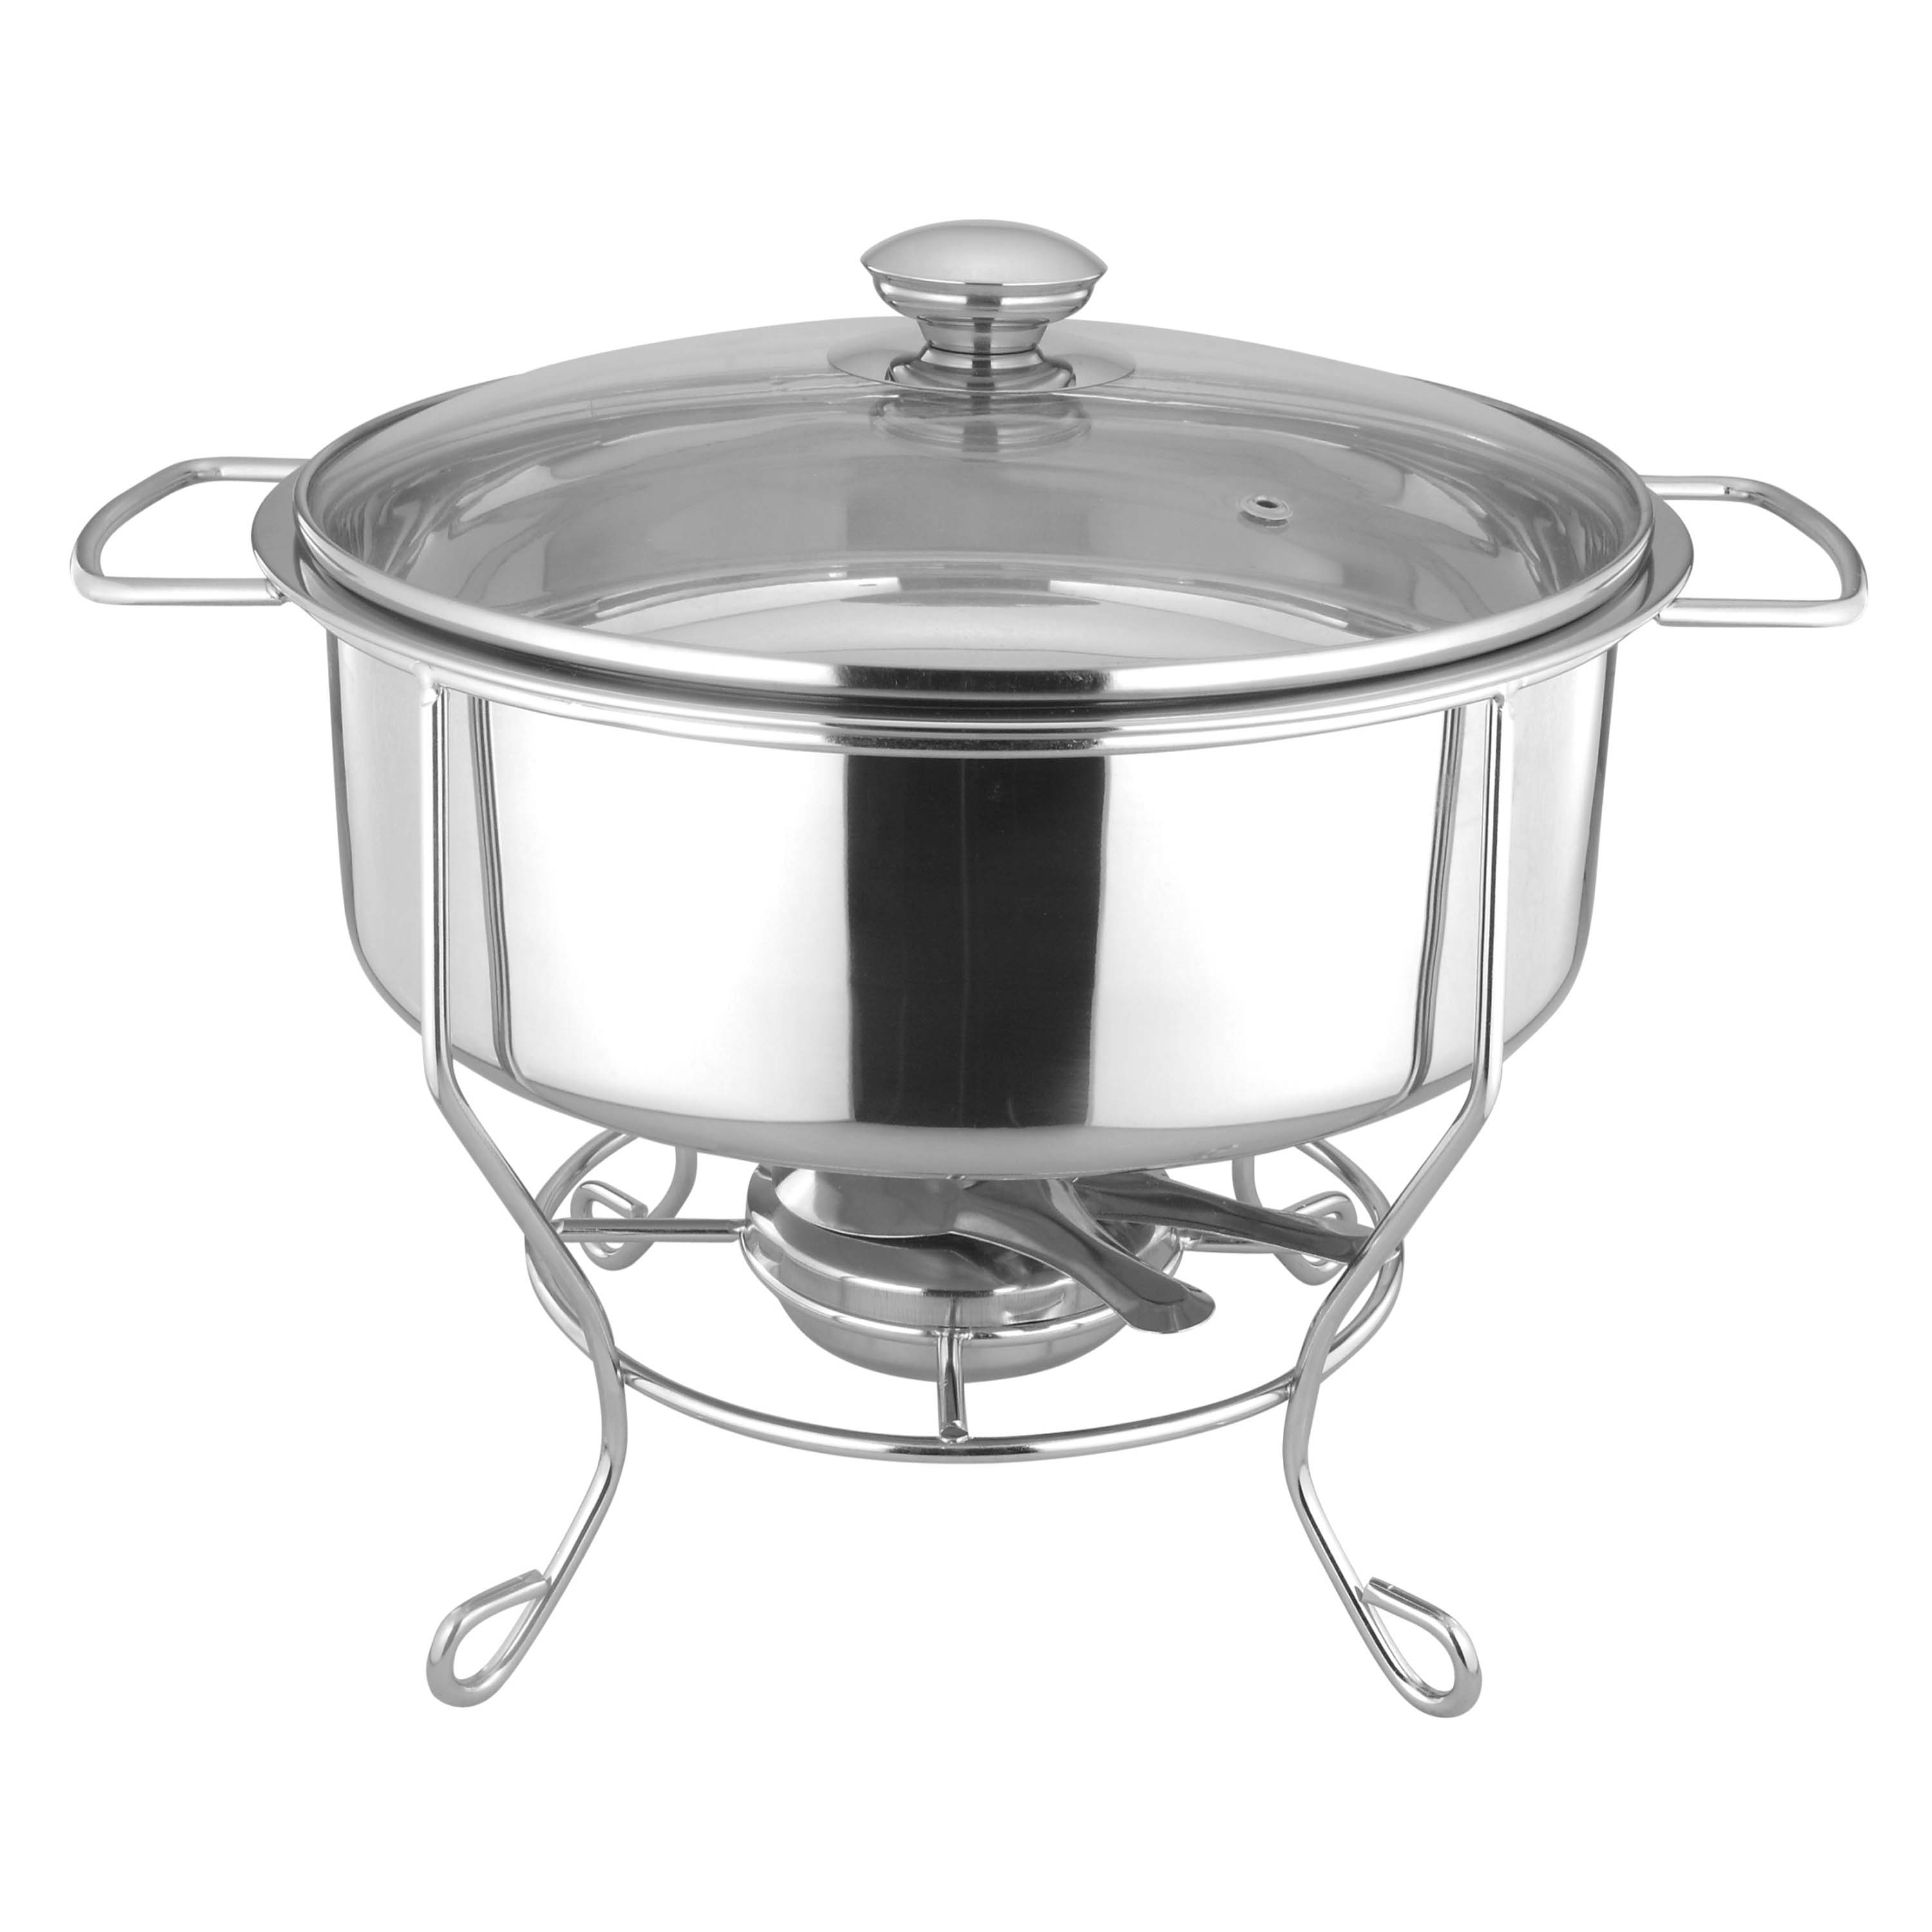 26cm Round Stainless Steel Chafing Dish with Iron Rack - Masflex Chafing Dish Round Stainless Steel